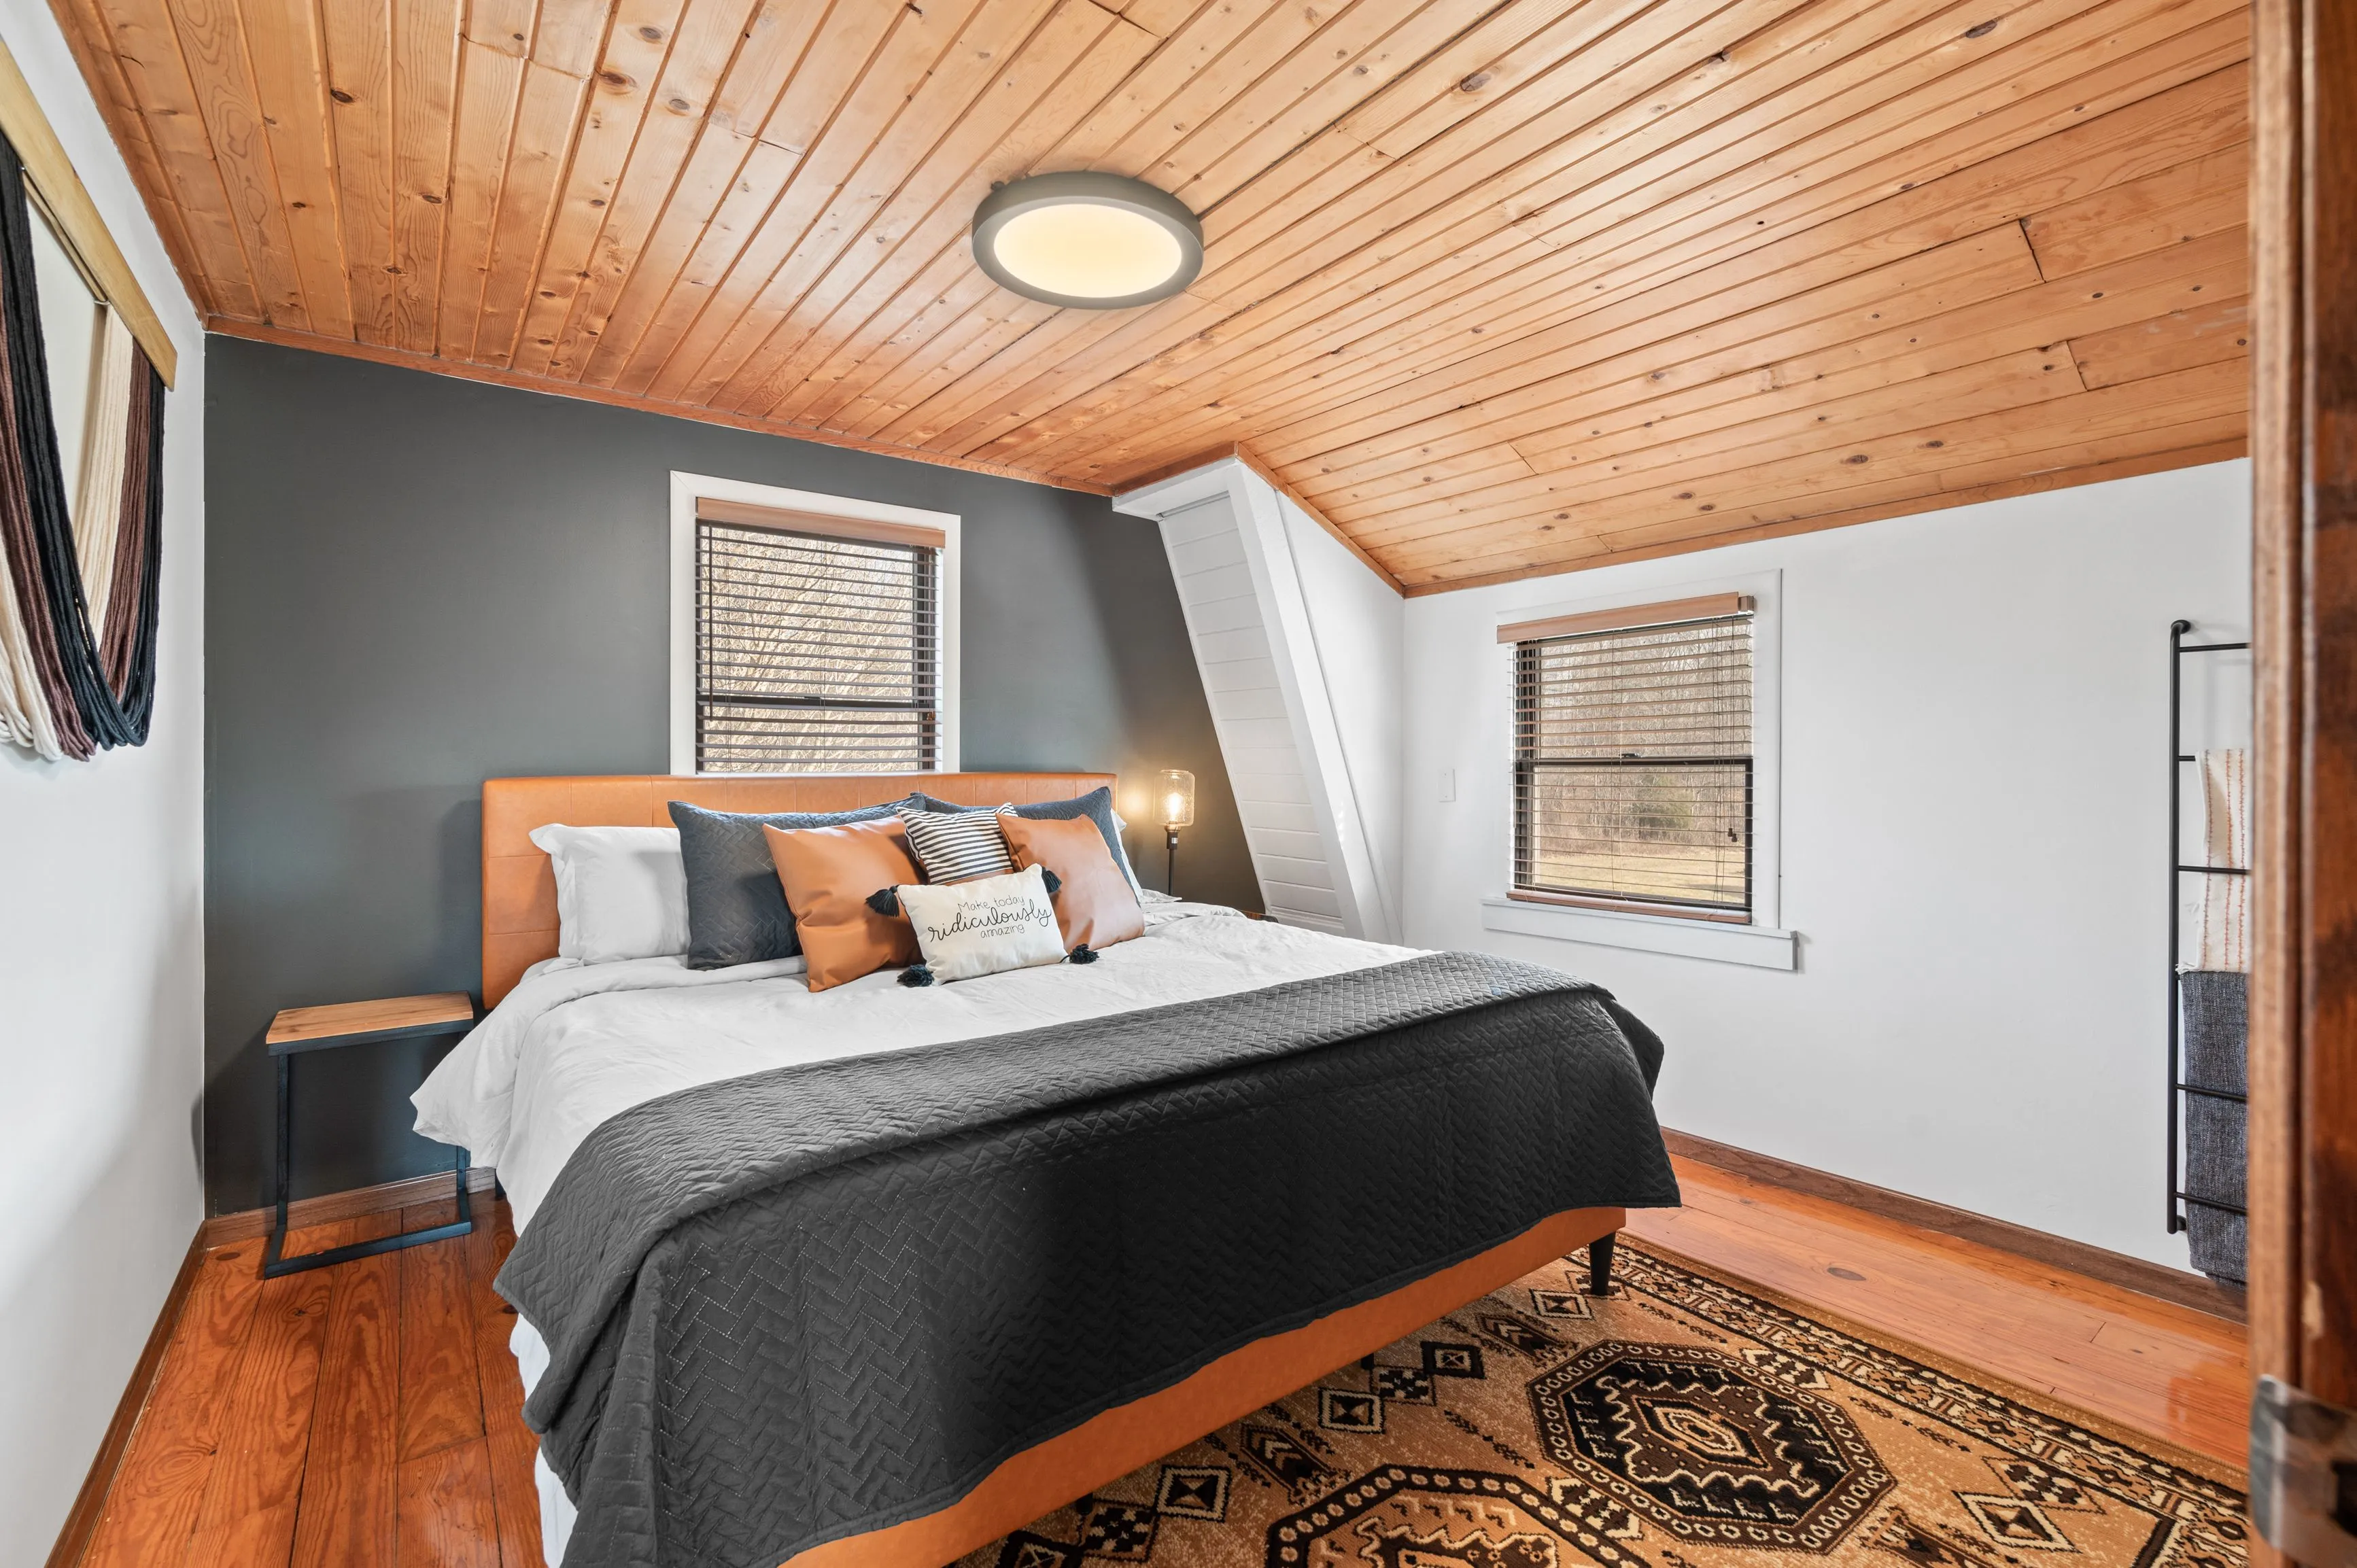 Cozy attic bedroom with slanted wooden ceiling, a large bed with decorative pillows, patterned rug, and a side table.